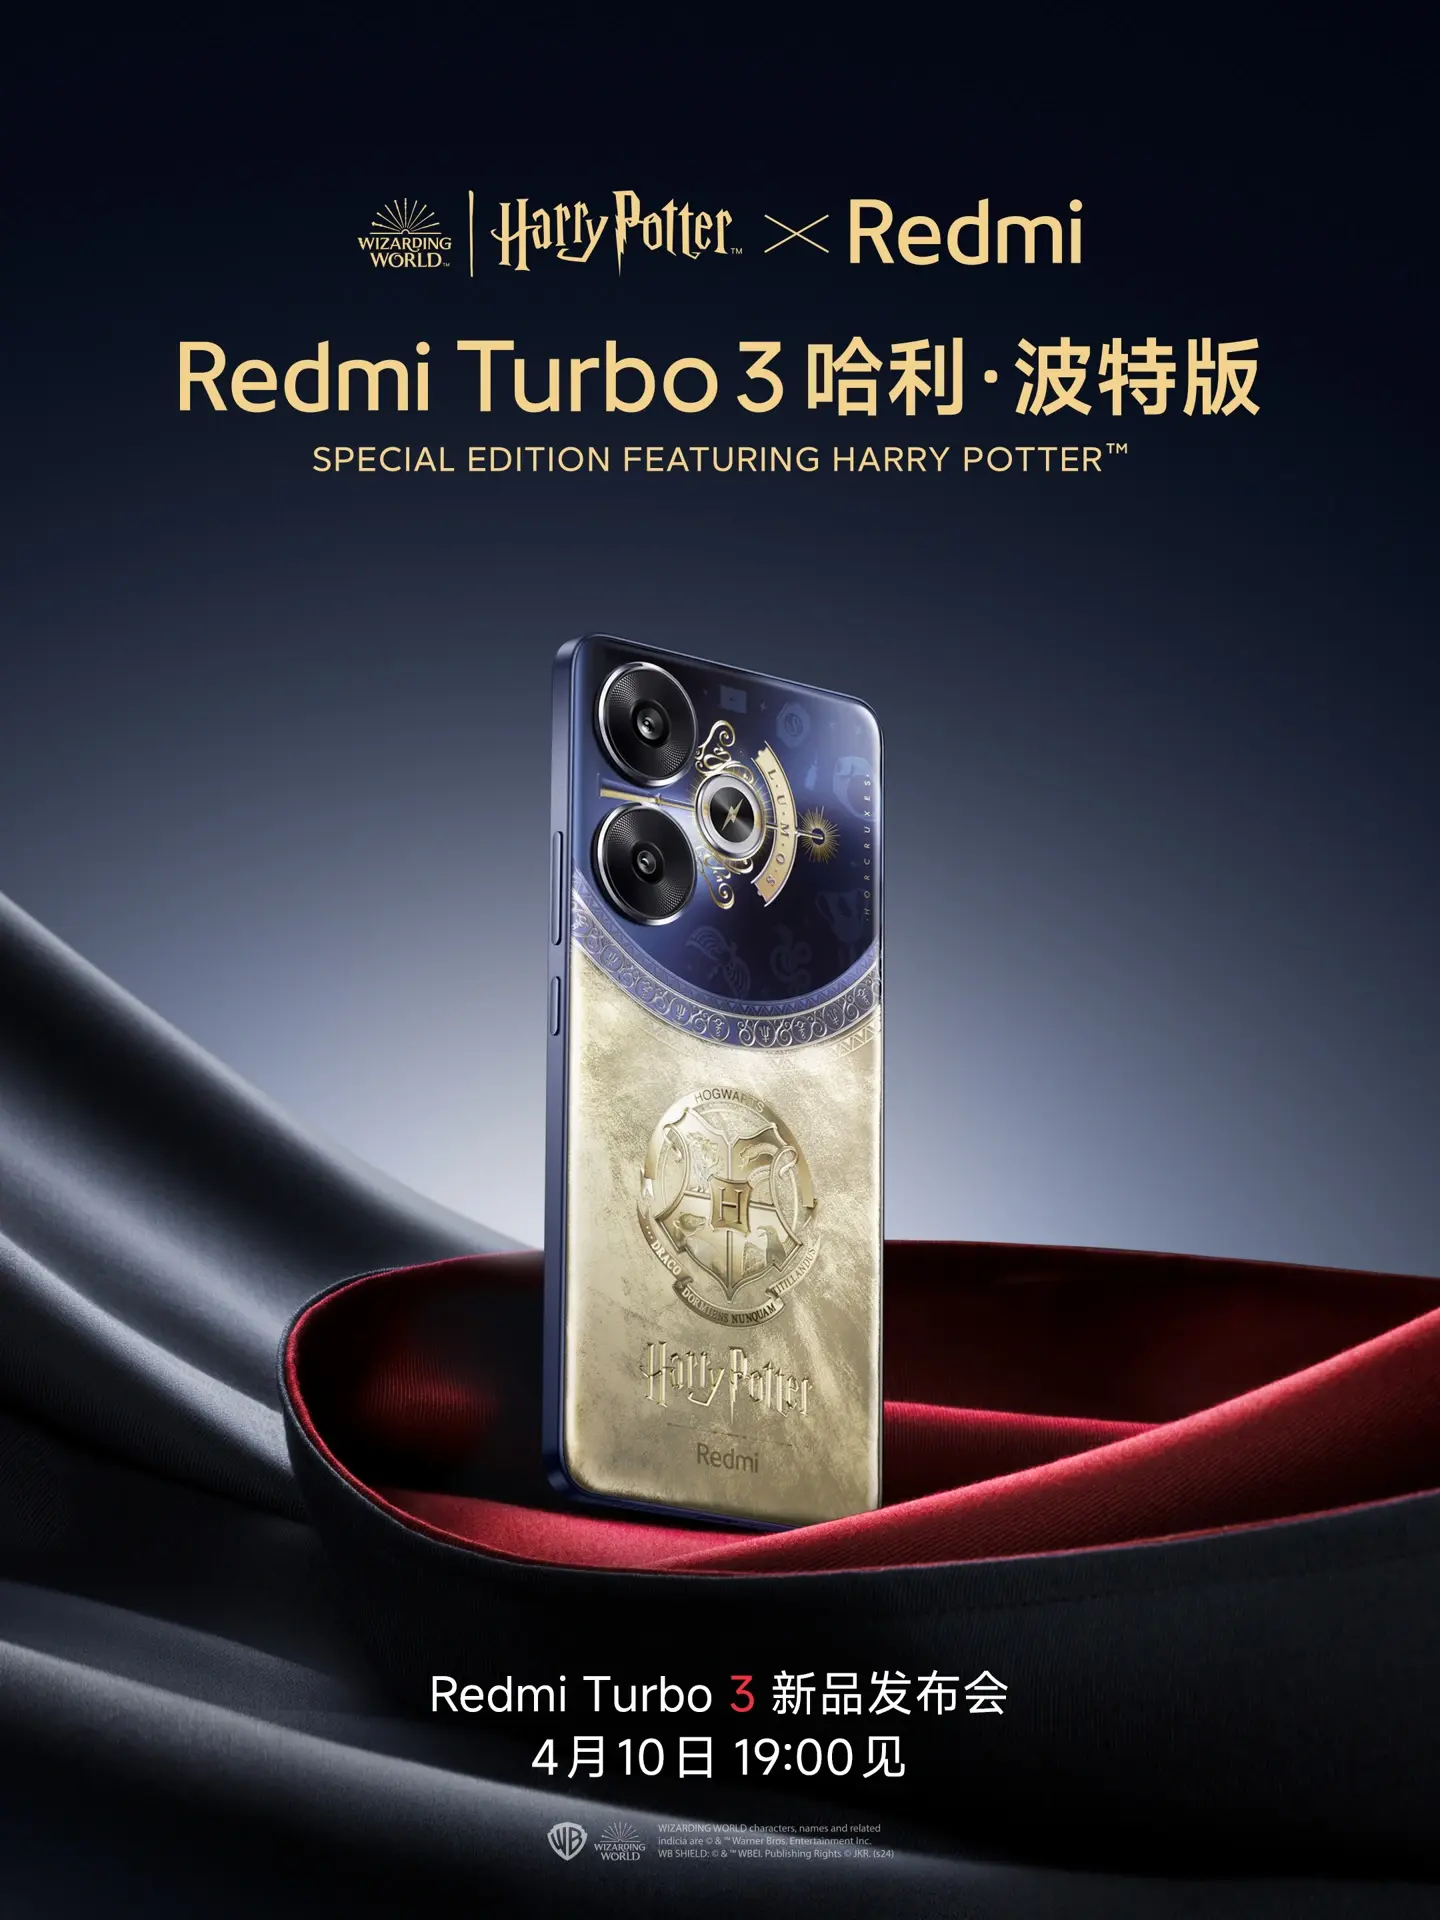 XIAOMI Launches Redmi Turbo 3 Handset, Priced from RMB1,999